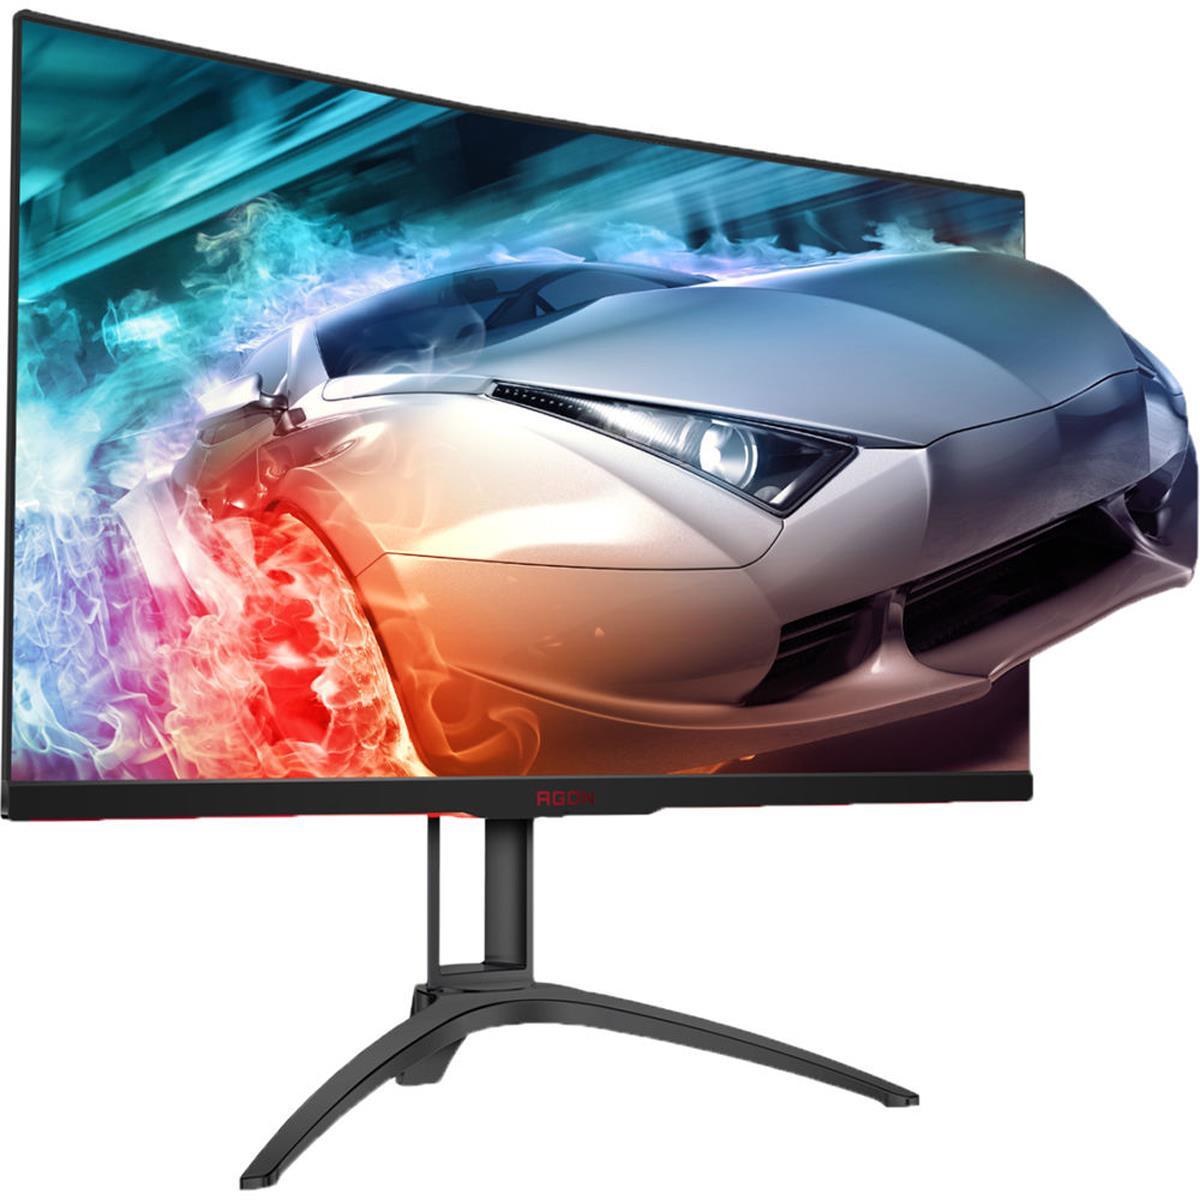 31.5in AOC Agon 144Hz VA Curved Gaming Monitor for $239.99 Shipped